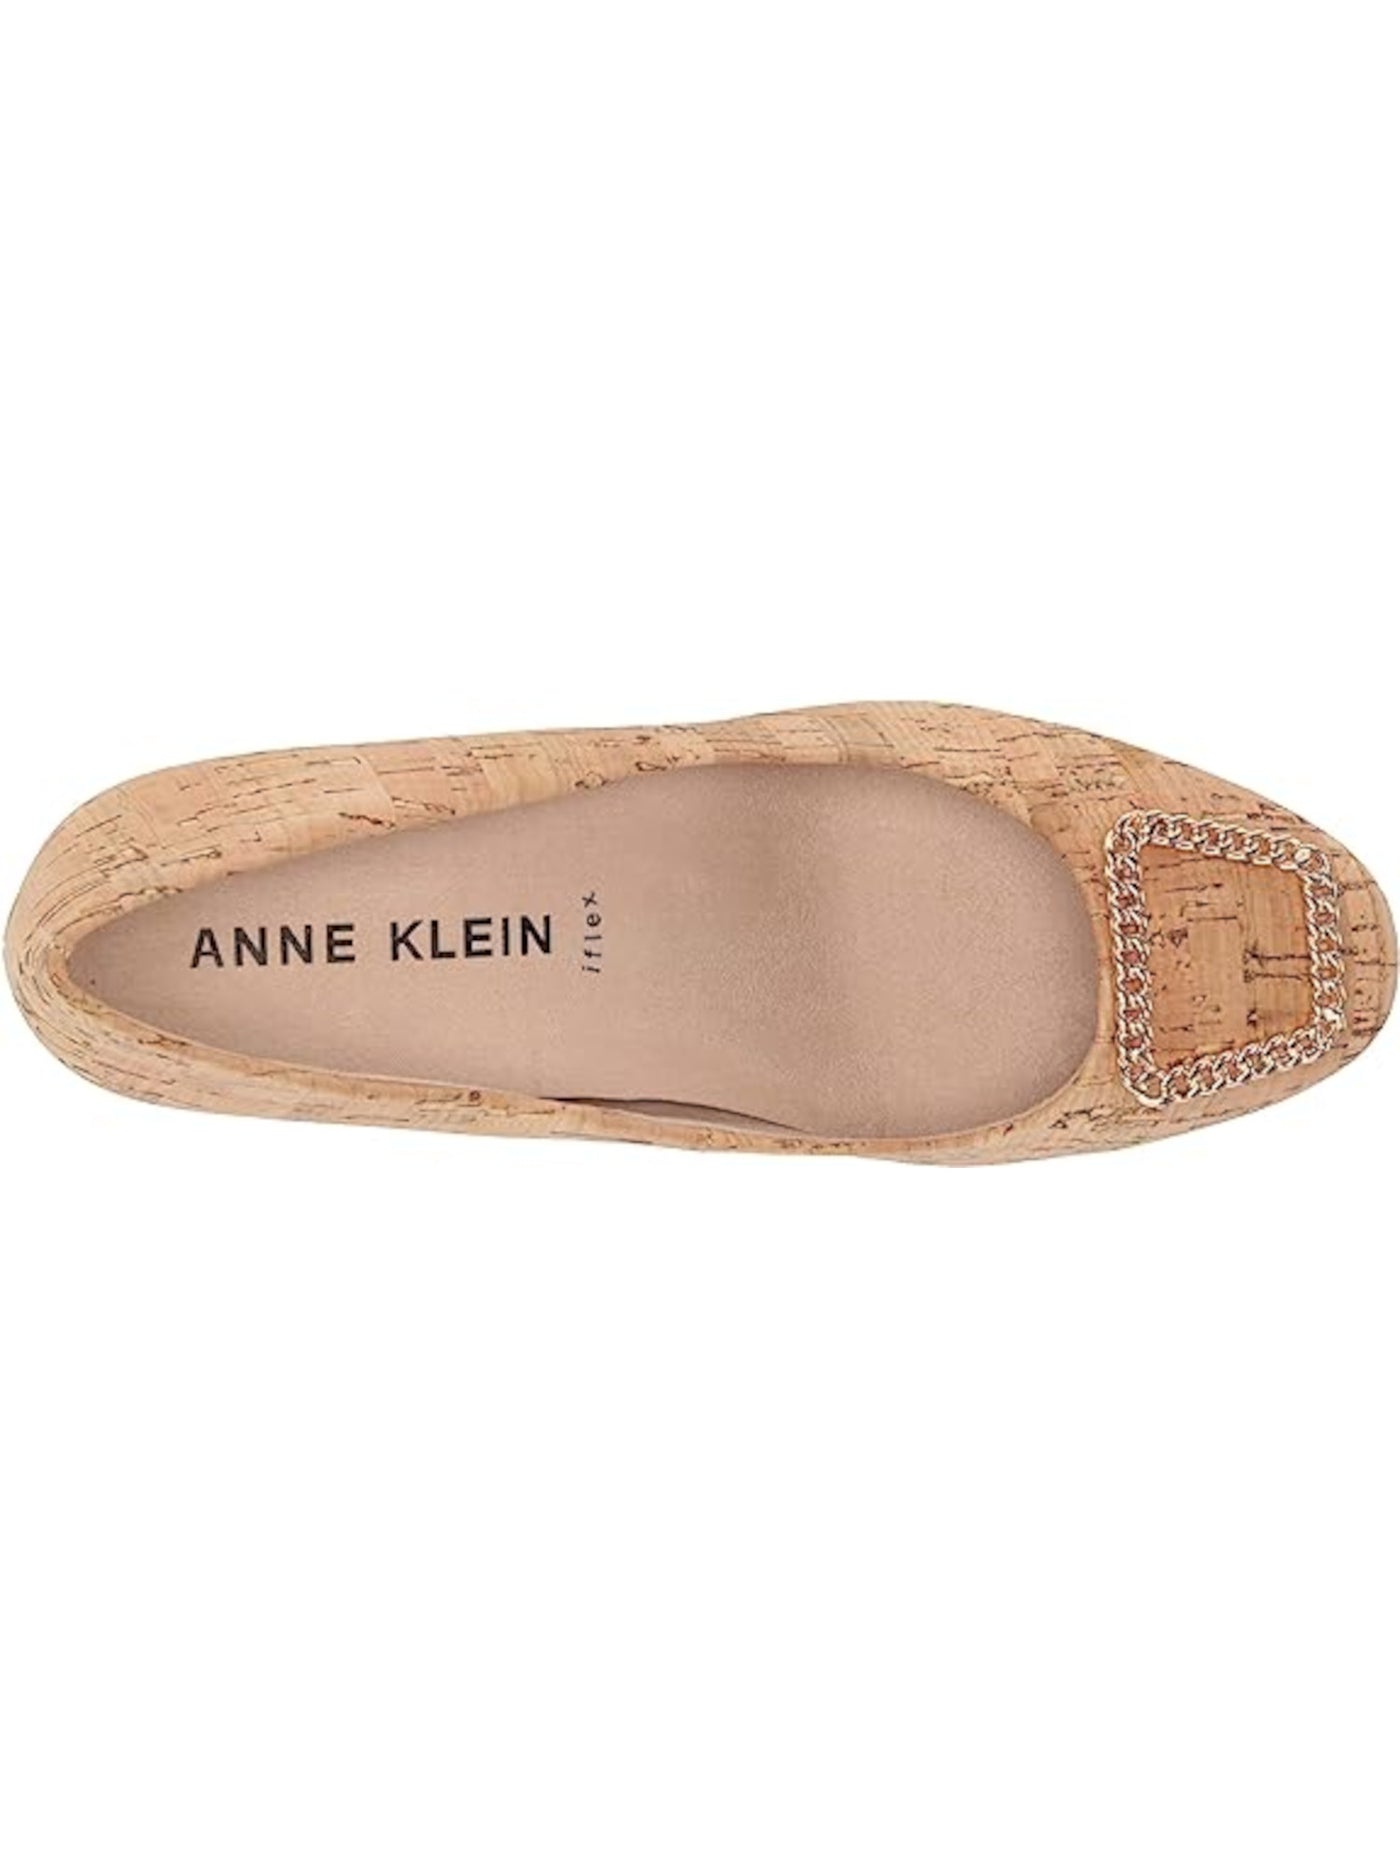 ANNE KLEIN Womens Beige Buckle Accent Removable Insole Senna Round Toe Wedge Slip On Pumps Shoes 6.5 M